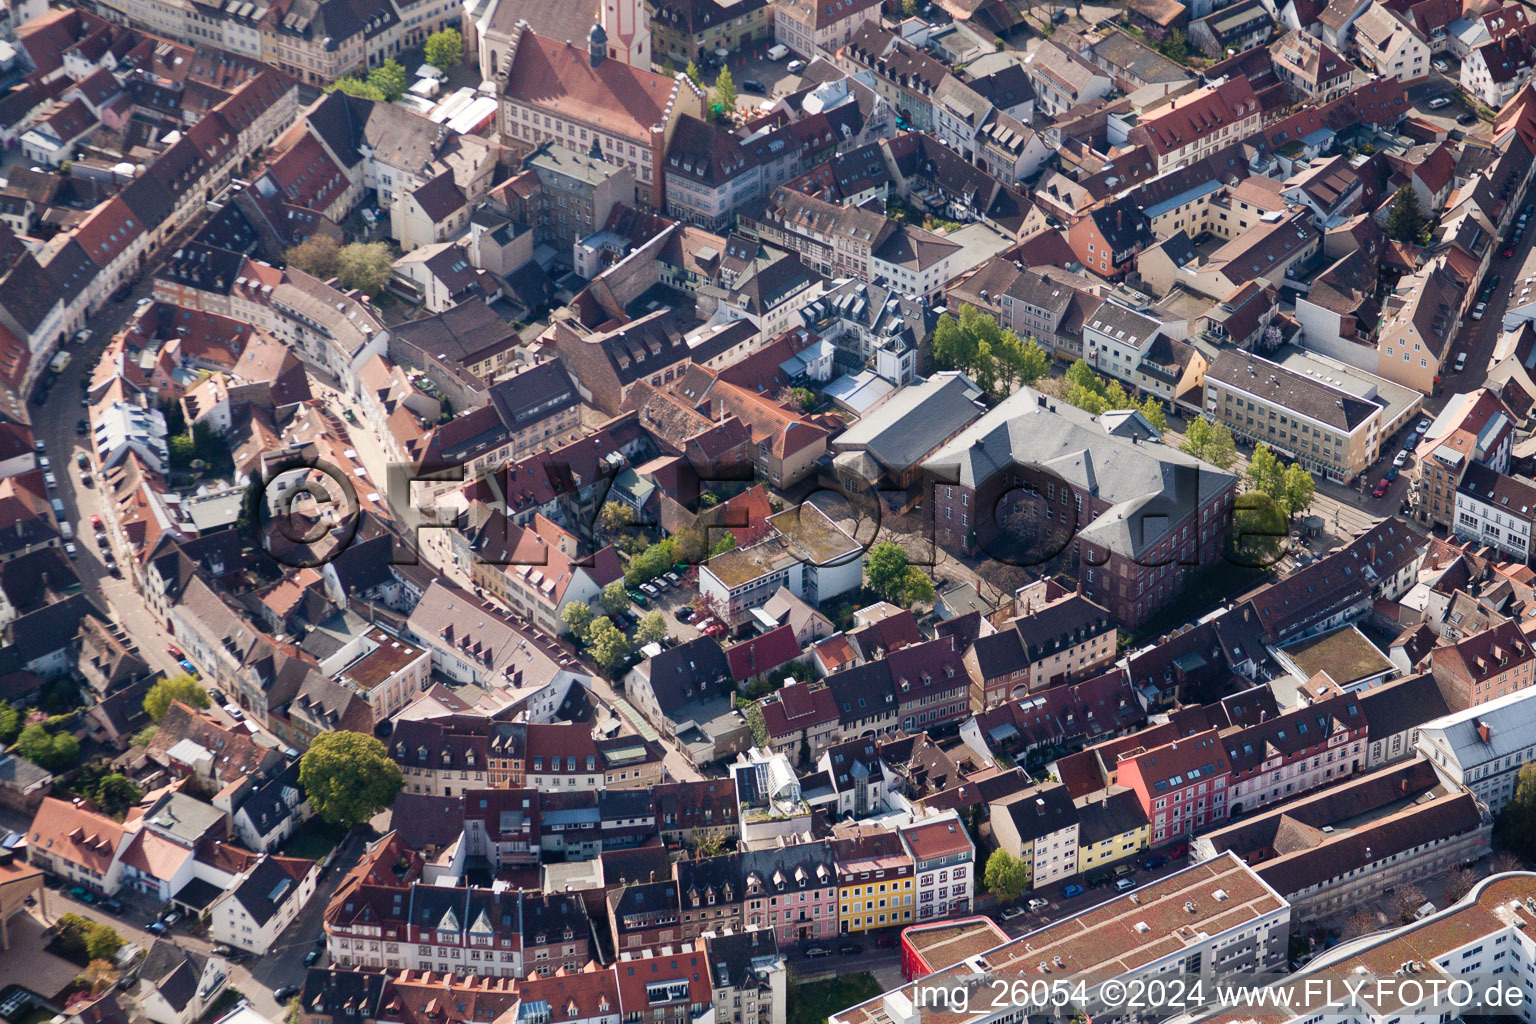 Oblique view of Old Town area and city center in the district Durlach in Karlsruhe in the state Baden-Wurttemberg